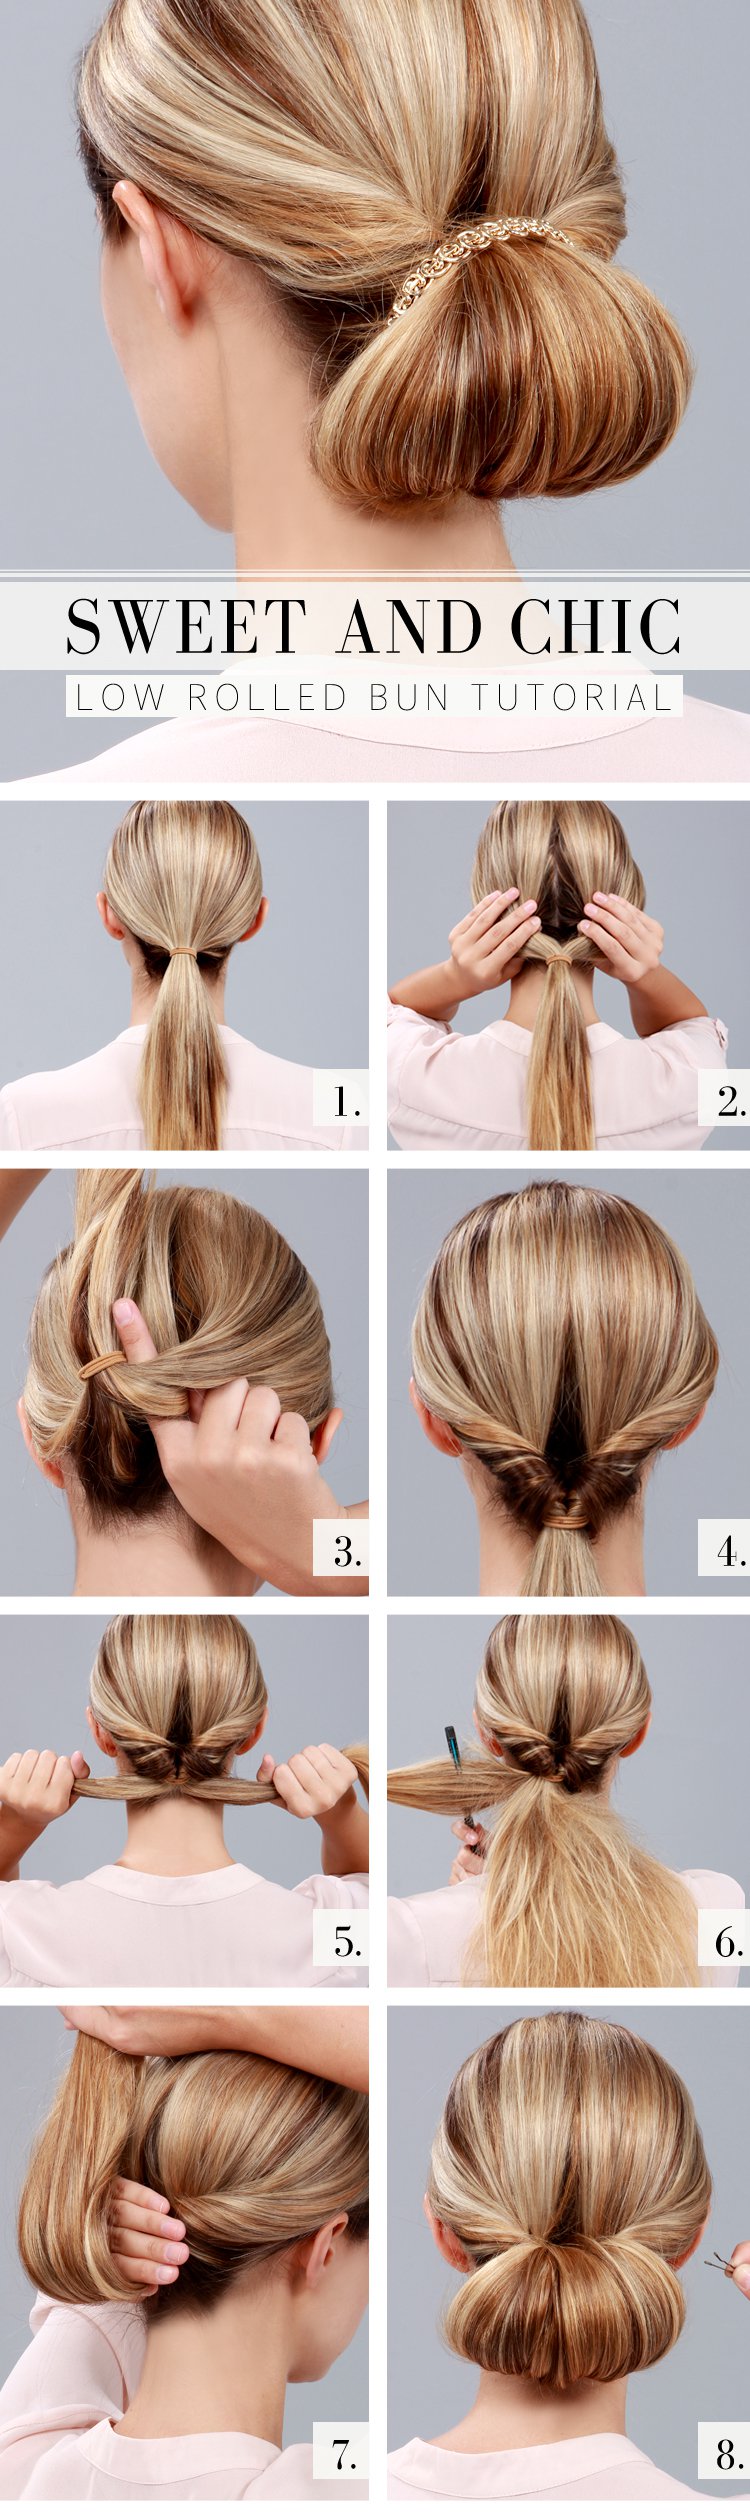 Simple rolled bun hairstyle